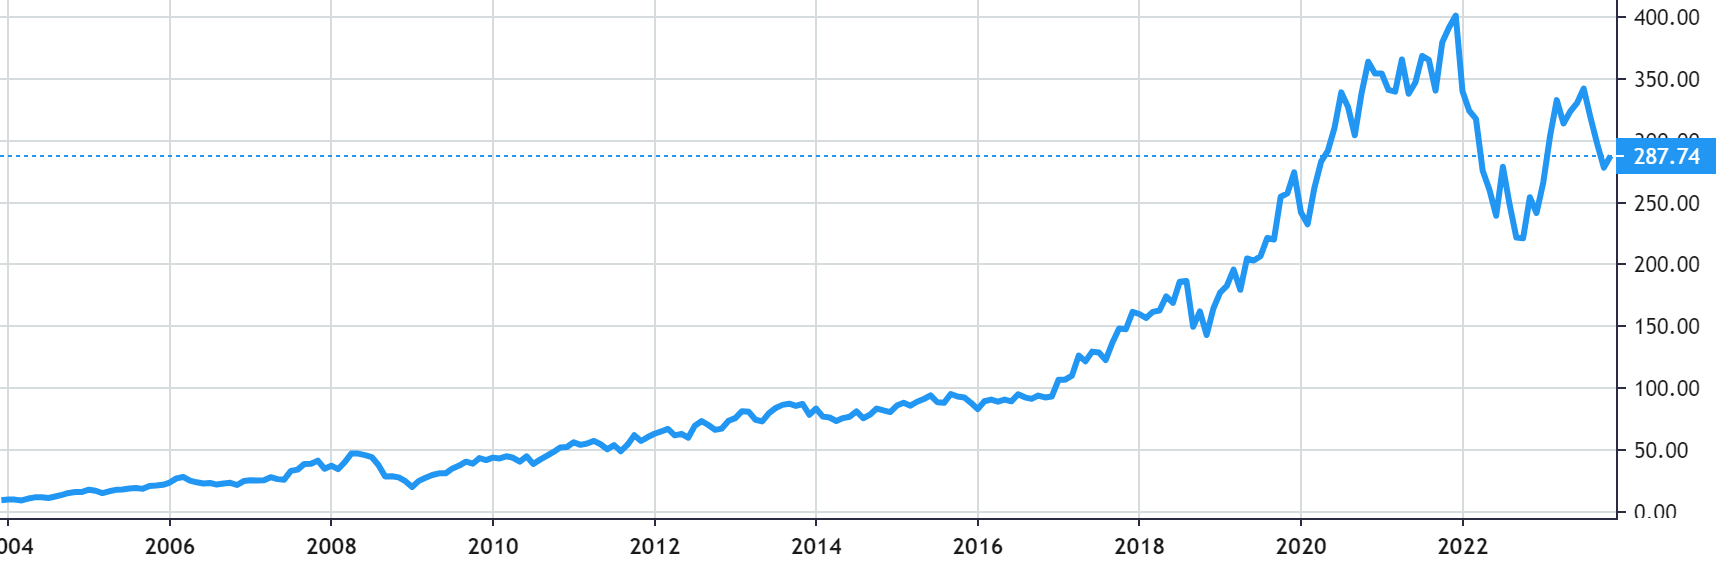 ANSYS share price history